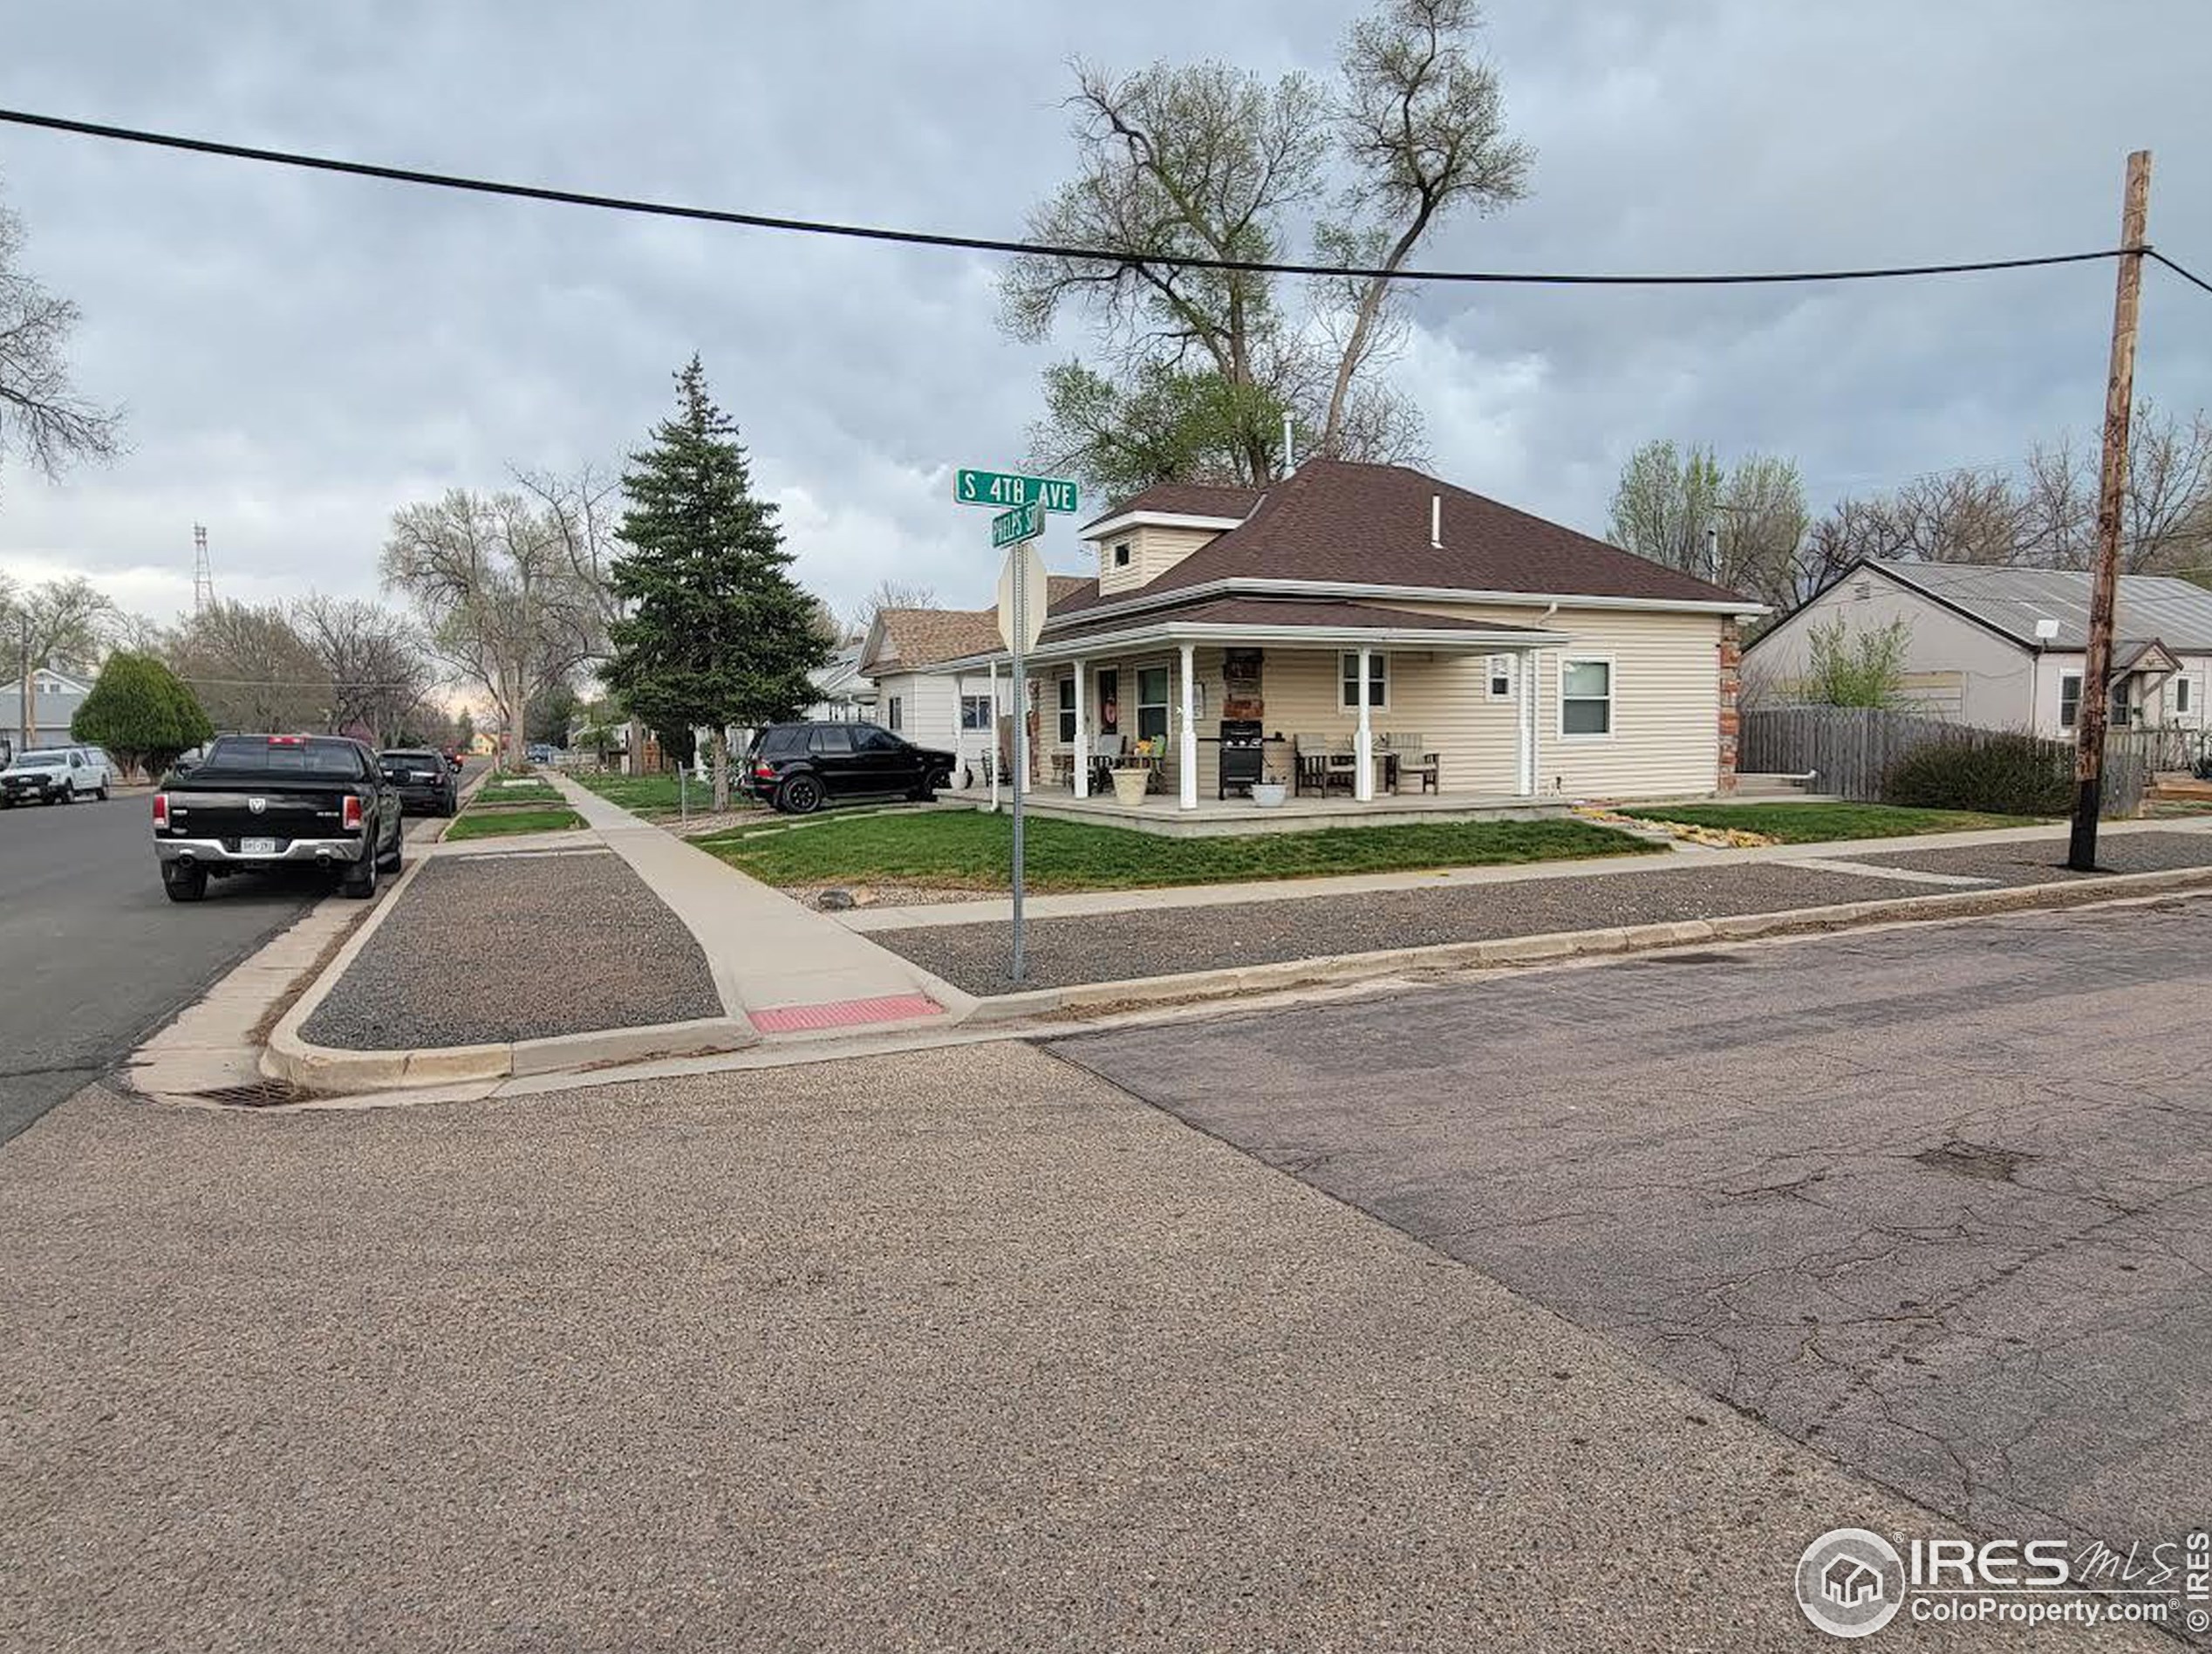 329 Phelps St, Sterling, CO 80751